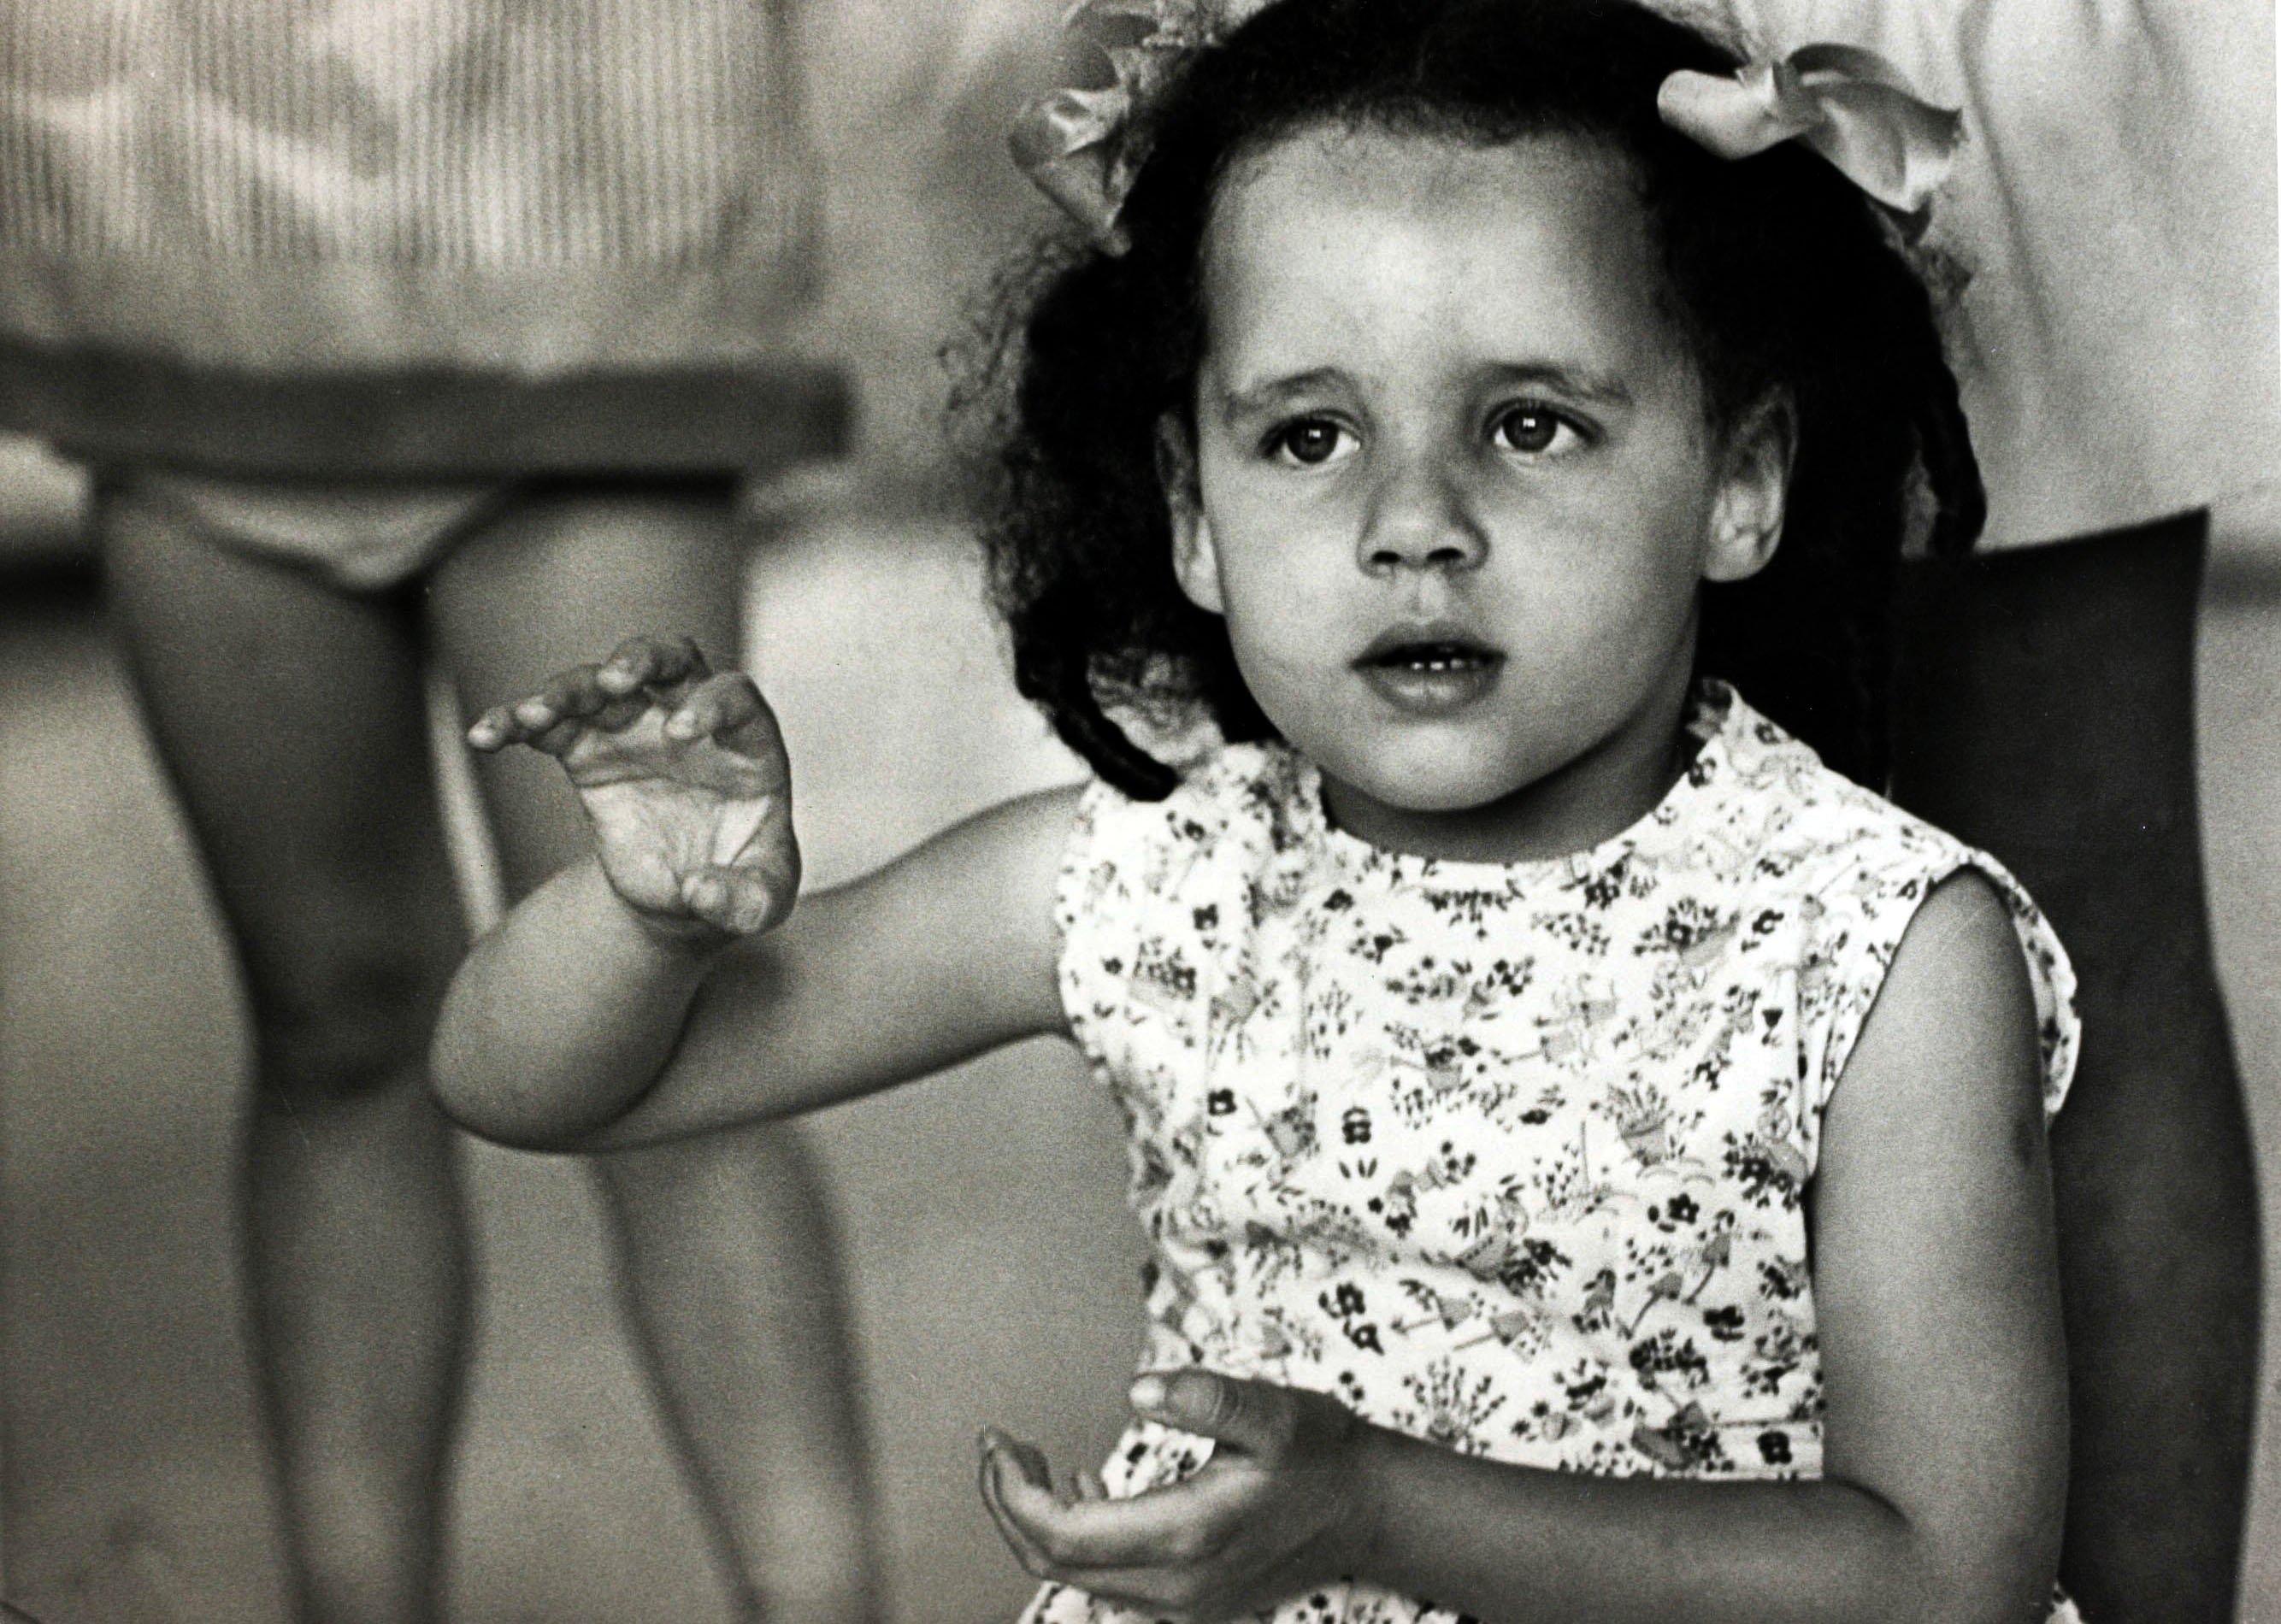 Dame Shirley Bassey's daughter Samantha at 3 years old pictured on July 13, 1967. | Photo: Getty Images